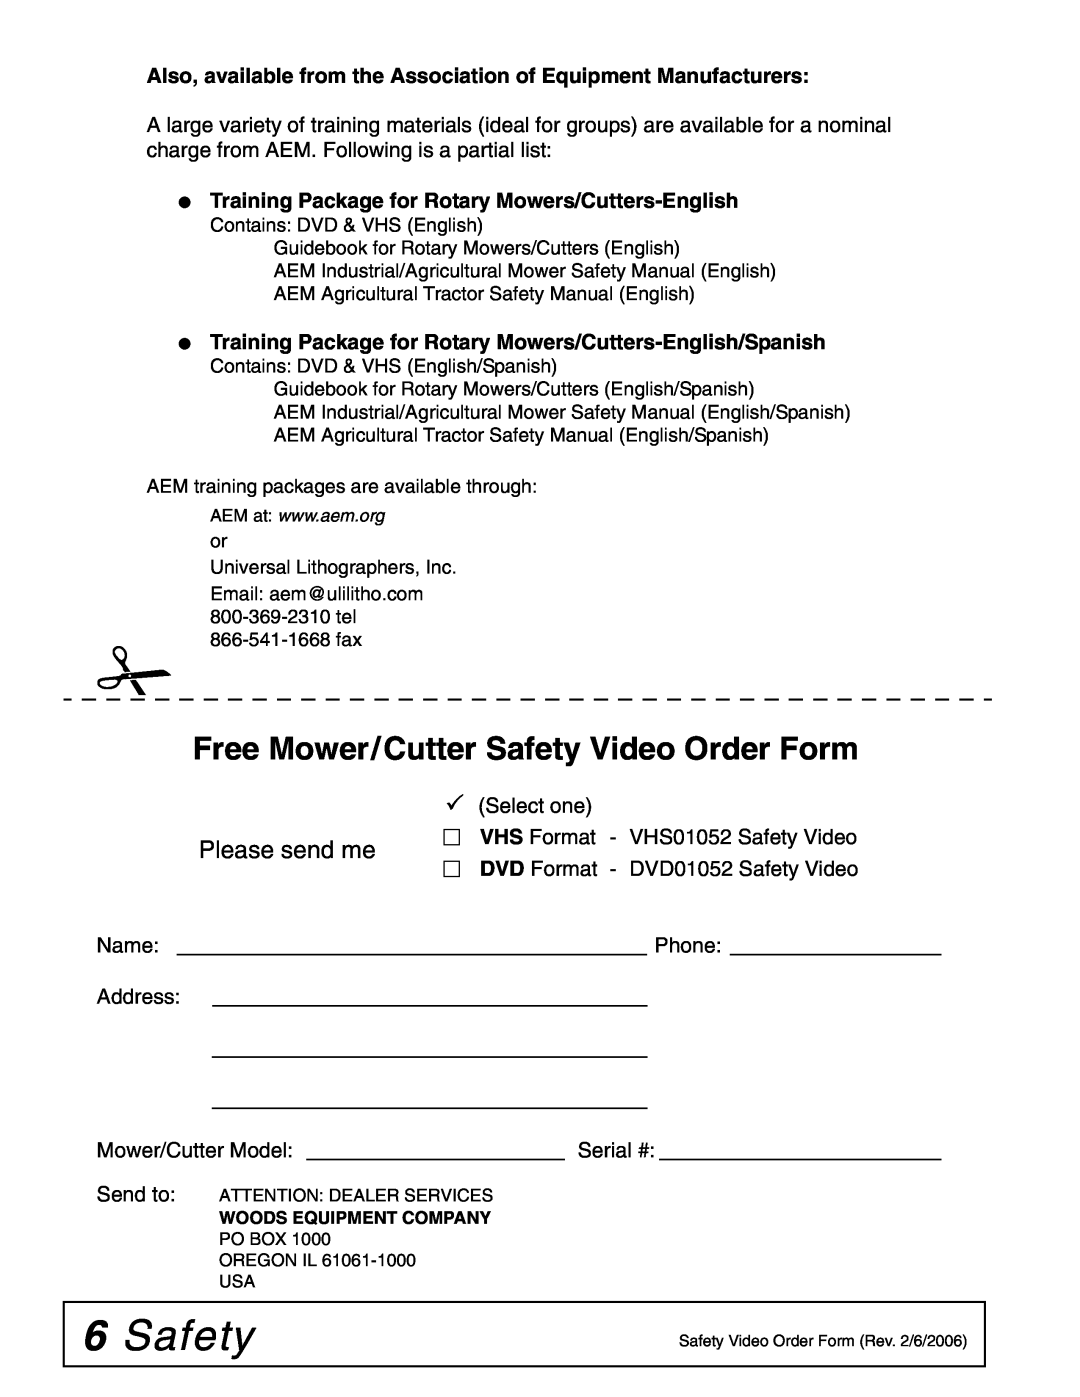 Woods Equipment DS96, DS120 Free Mower/Cutter Safety Video Order Form, Please send me, Select one, Name Phone Address 